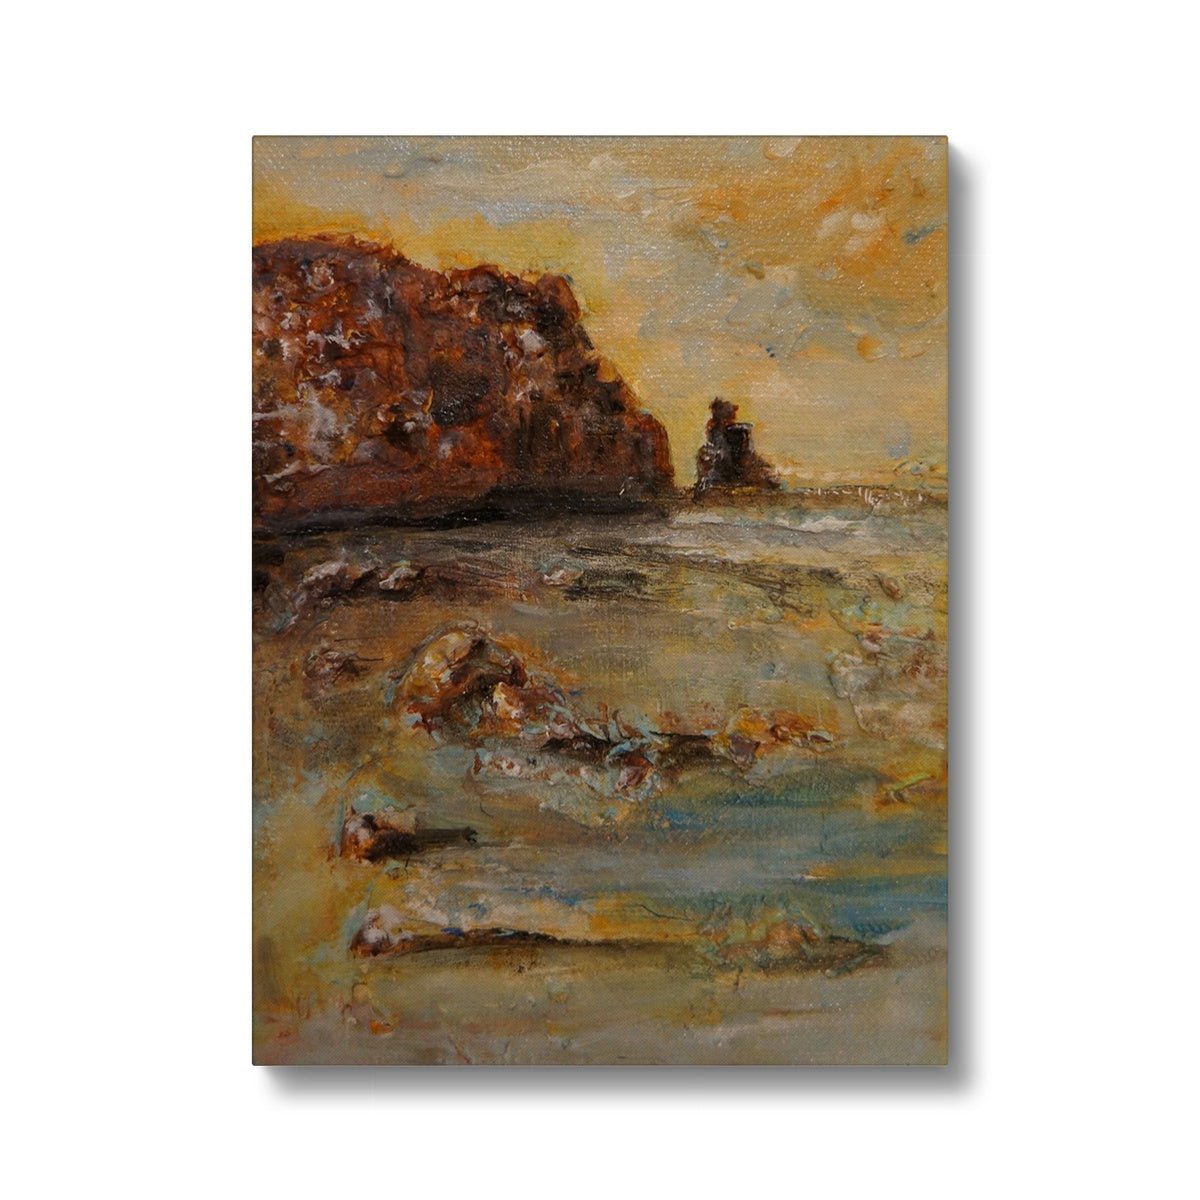 Talisker Bay Skye Painting | Canvas From Scotland-Contemporary Stretched Canvas Prints-Skye Art Gallery-12"x16"-Paintings, Prints, Homeware, Art Gifts From Scotland By Scottish Artist Kevin Hunter